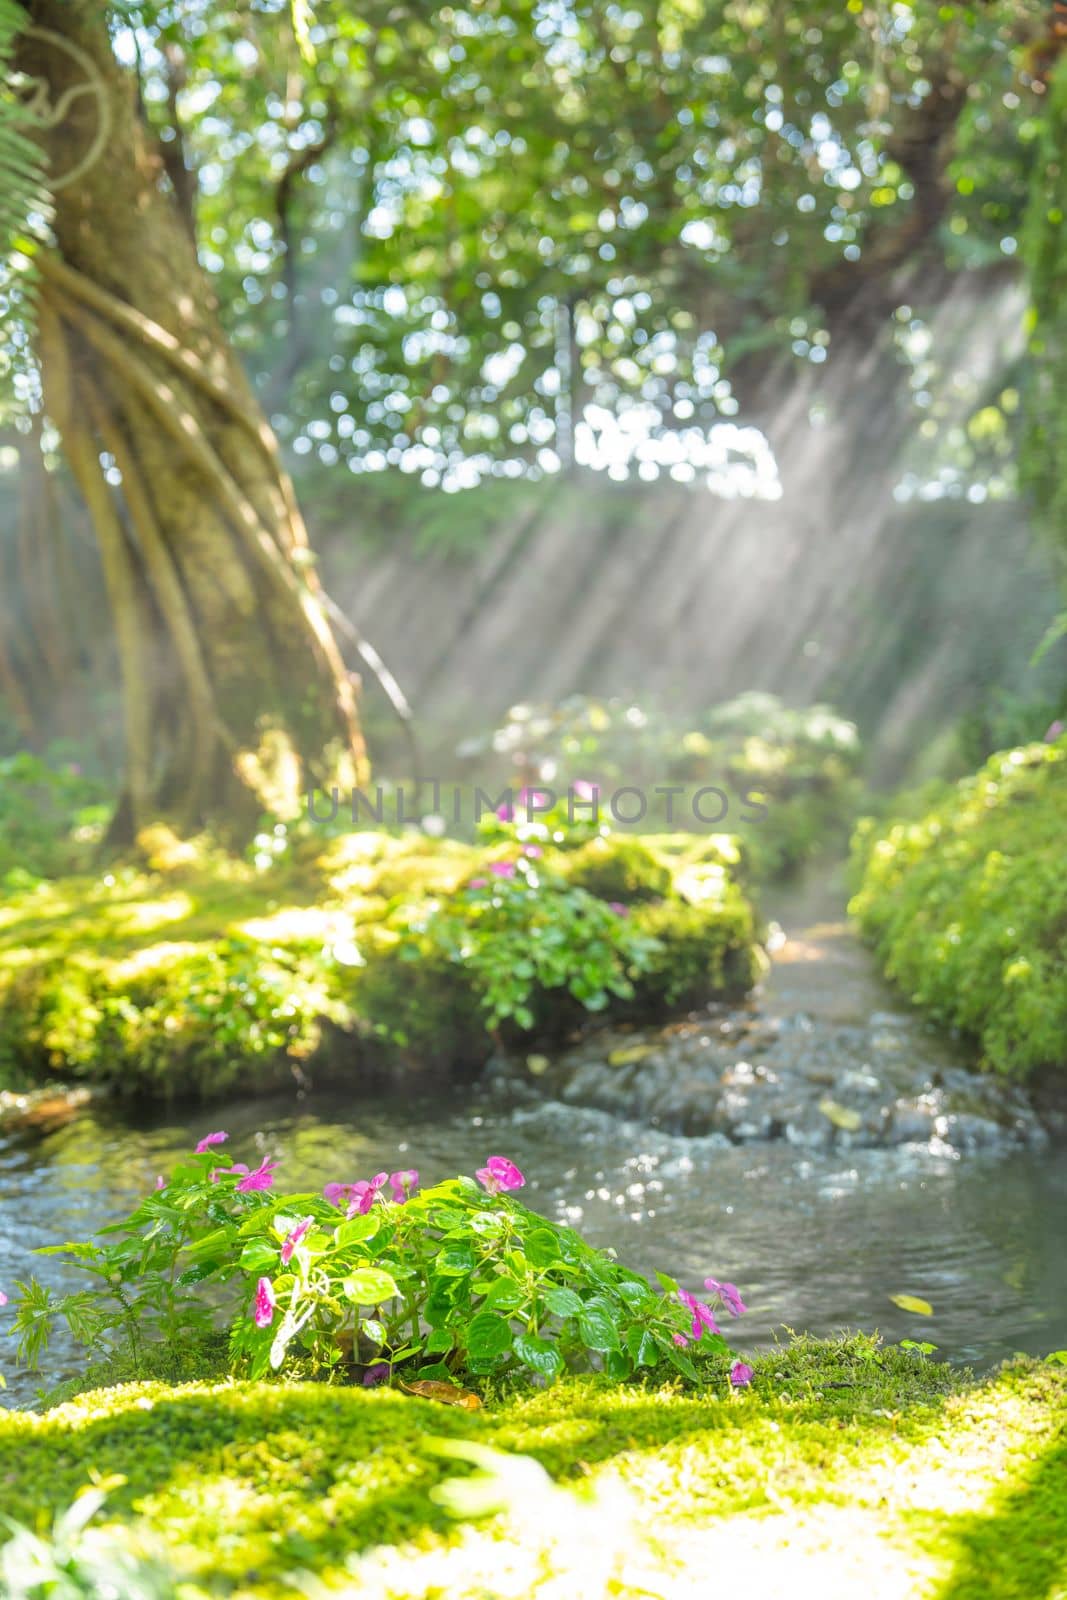 The Selective focus at beautiful flower in spring moss and fern at the garden, Chiang Mai, Thailand by Gamjai